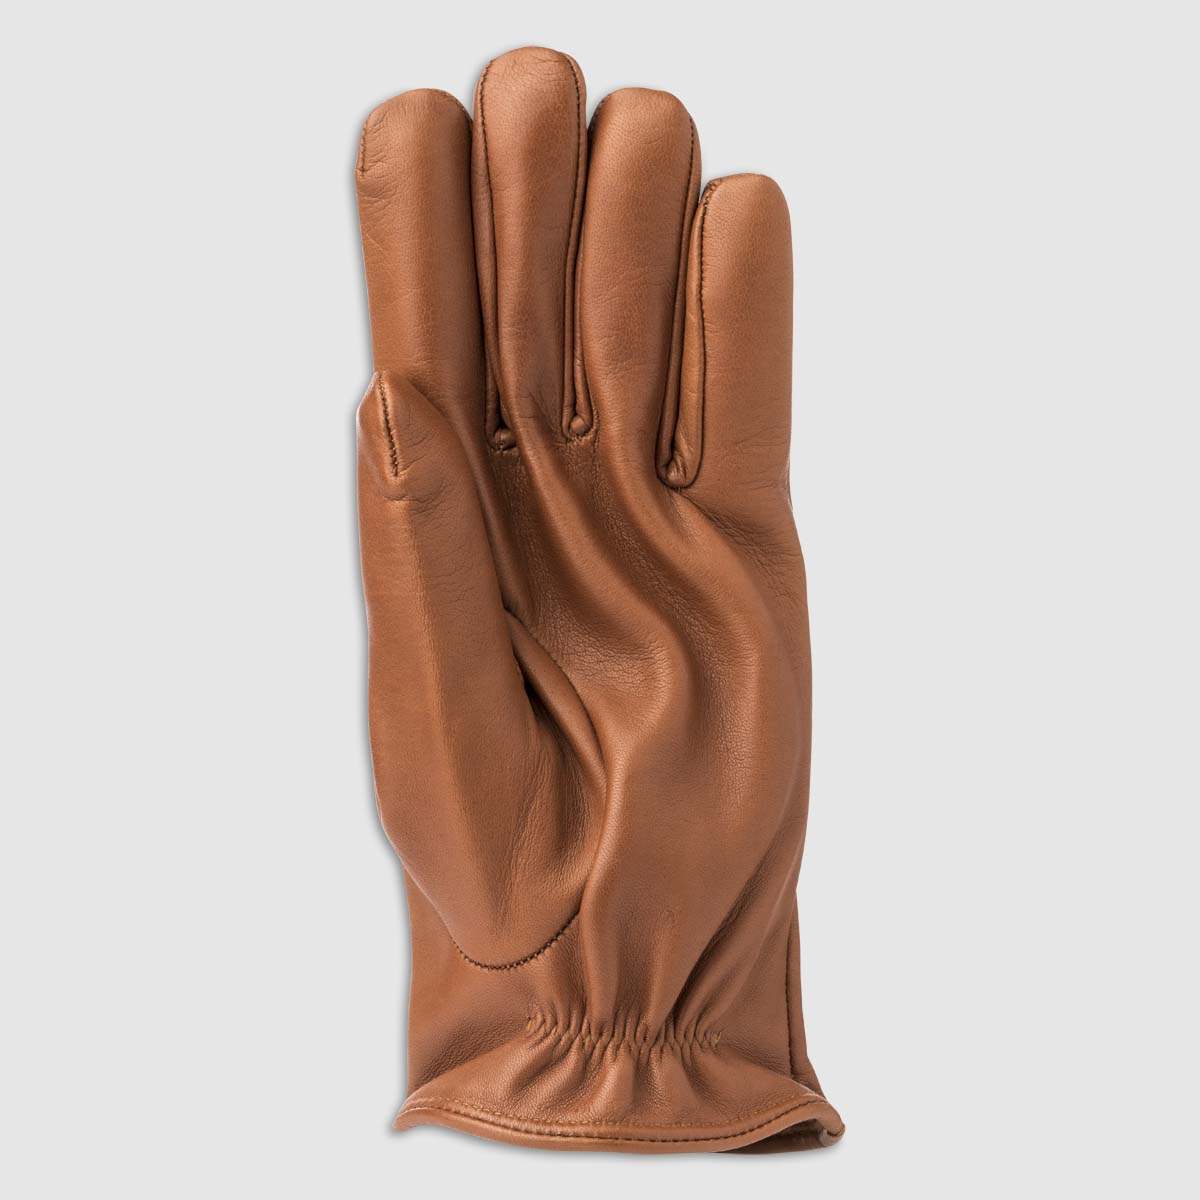 Nappa Leather Glove with Cashmere Lining in Cognac Alpo Guanti on sale 2022 2